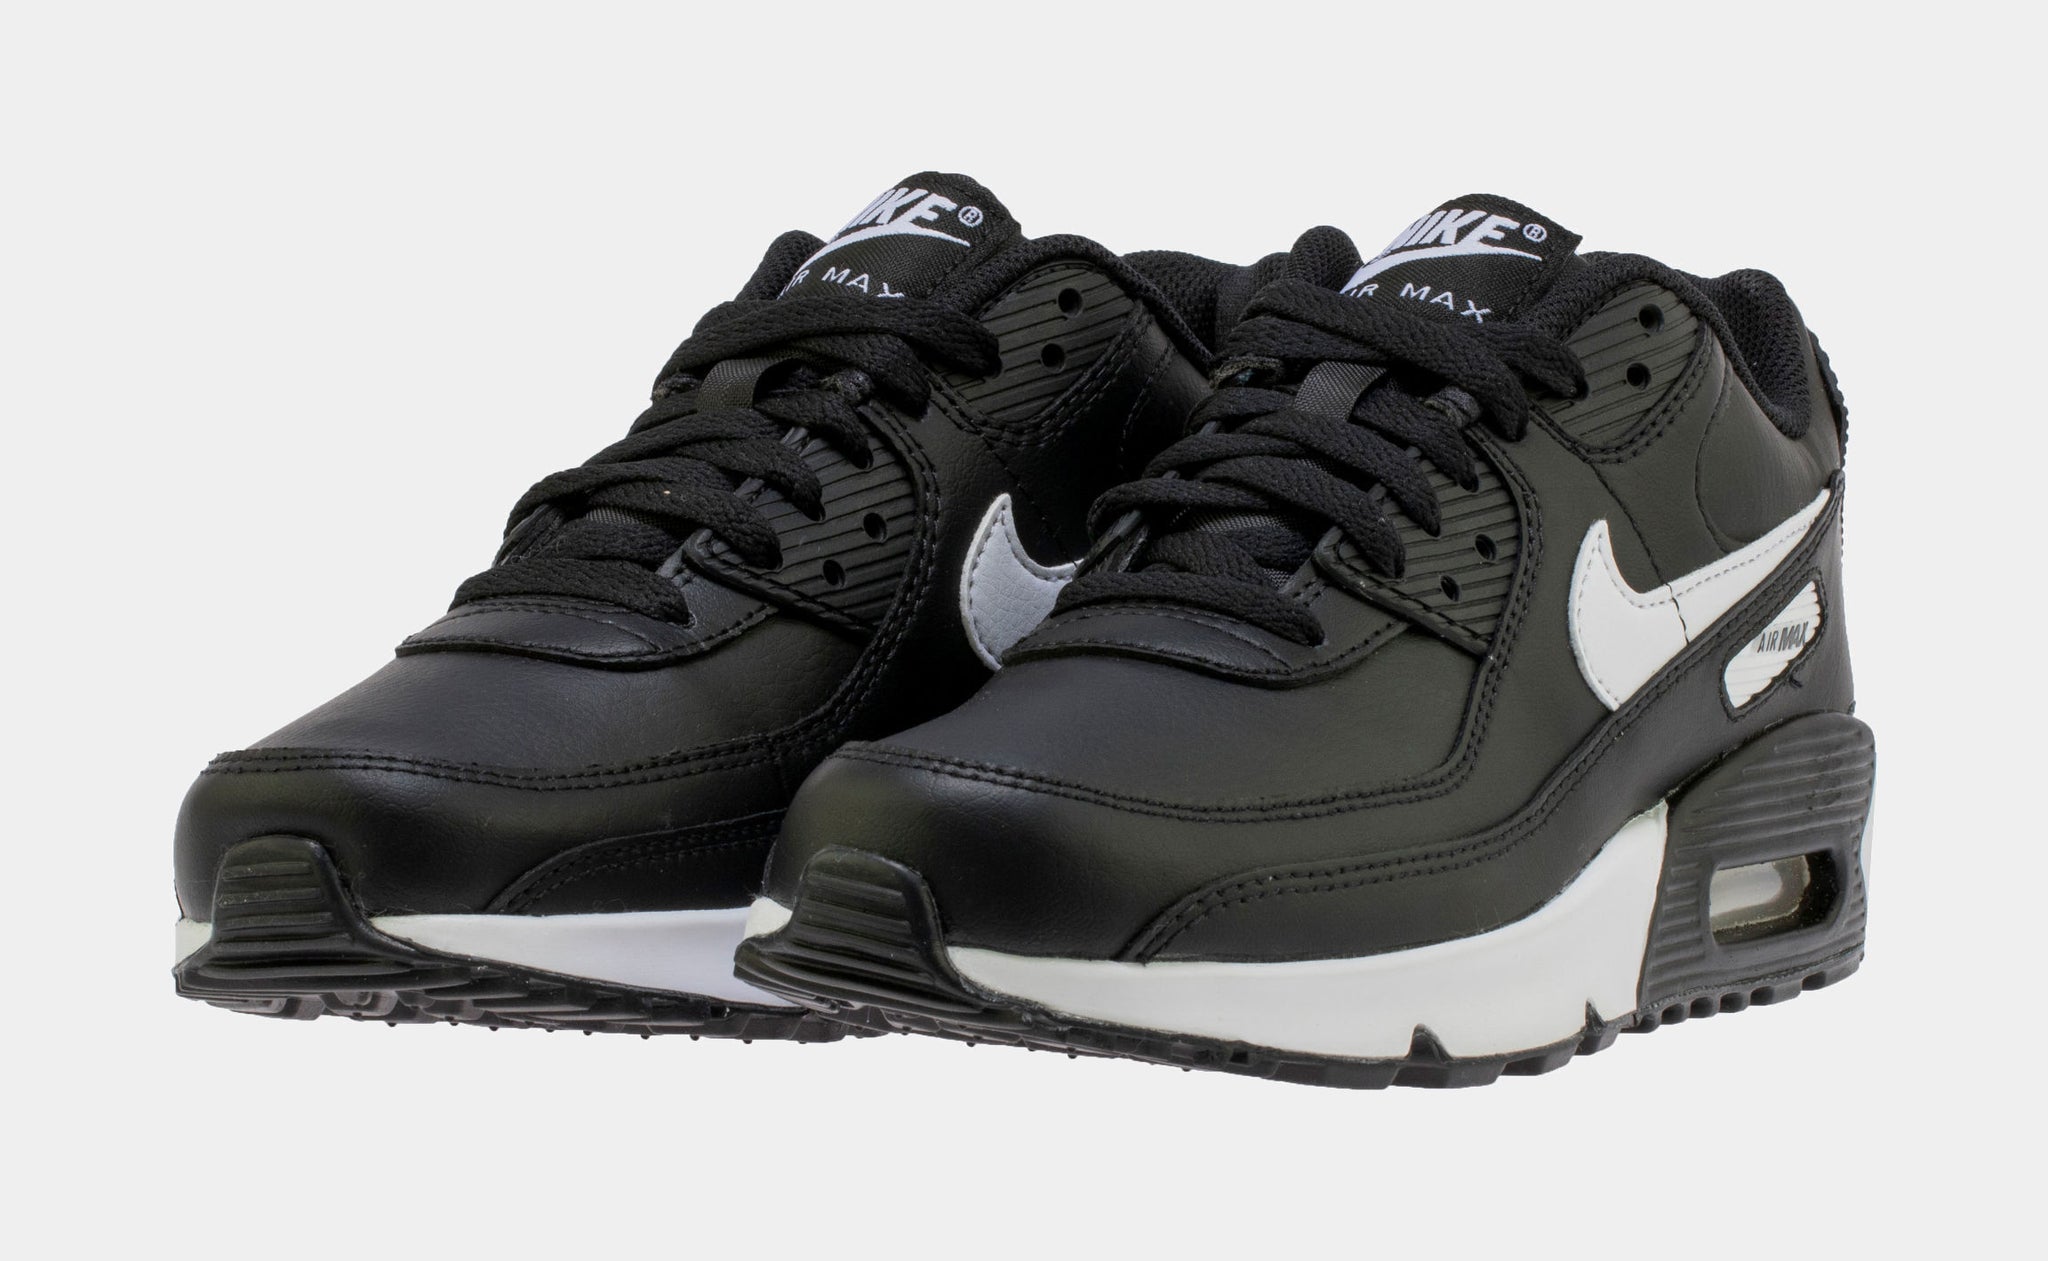 Nike Air Max 90 365 Leather Grade School Running Shoes Black